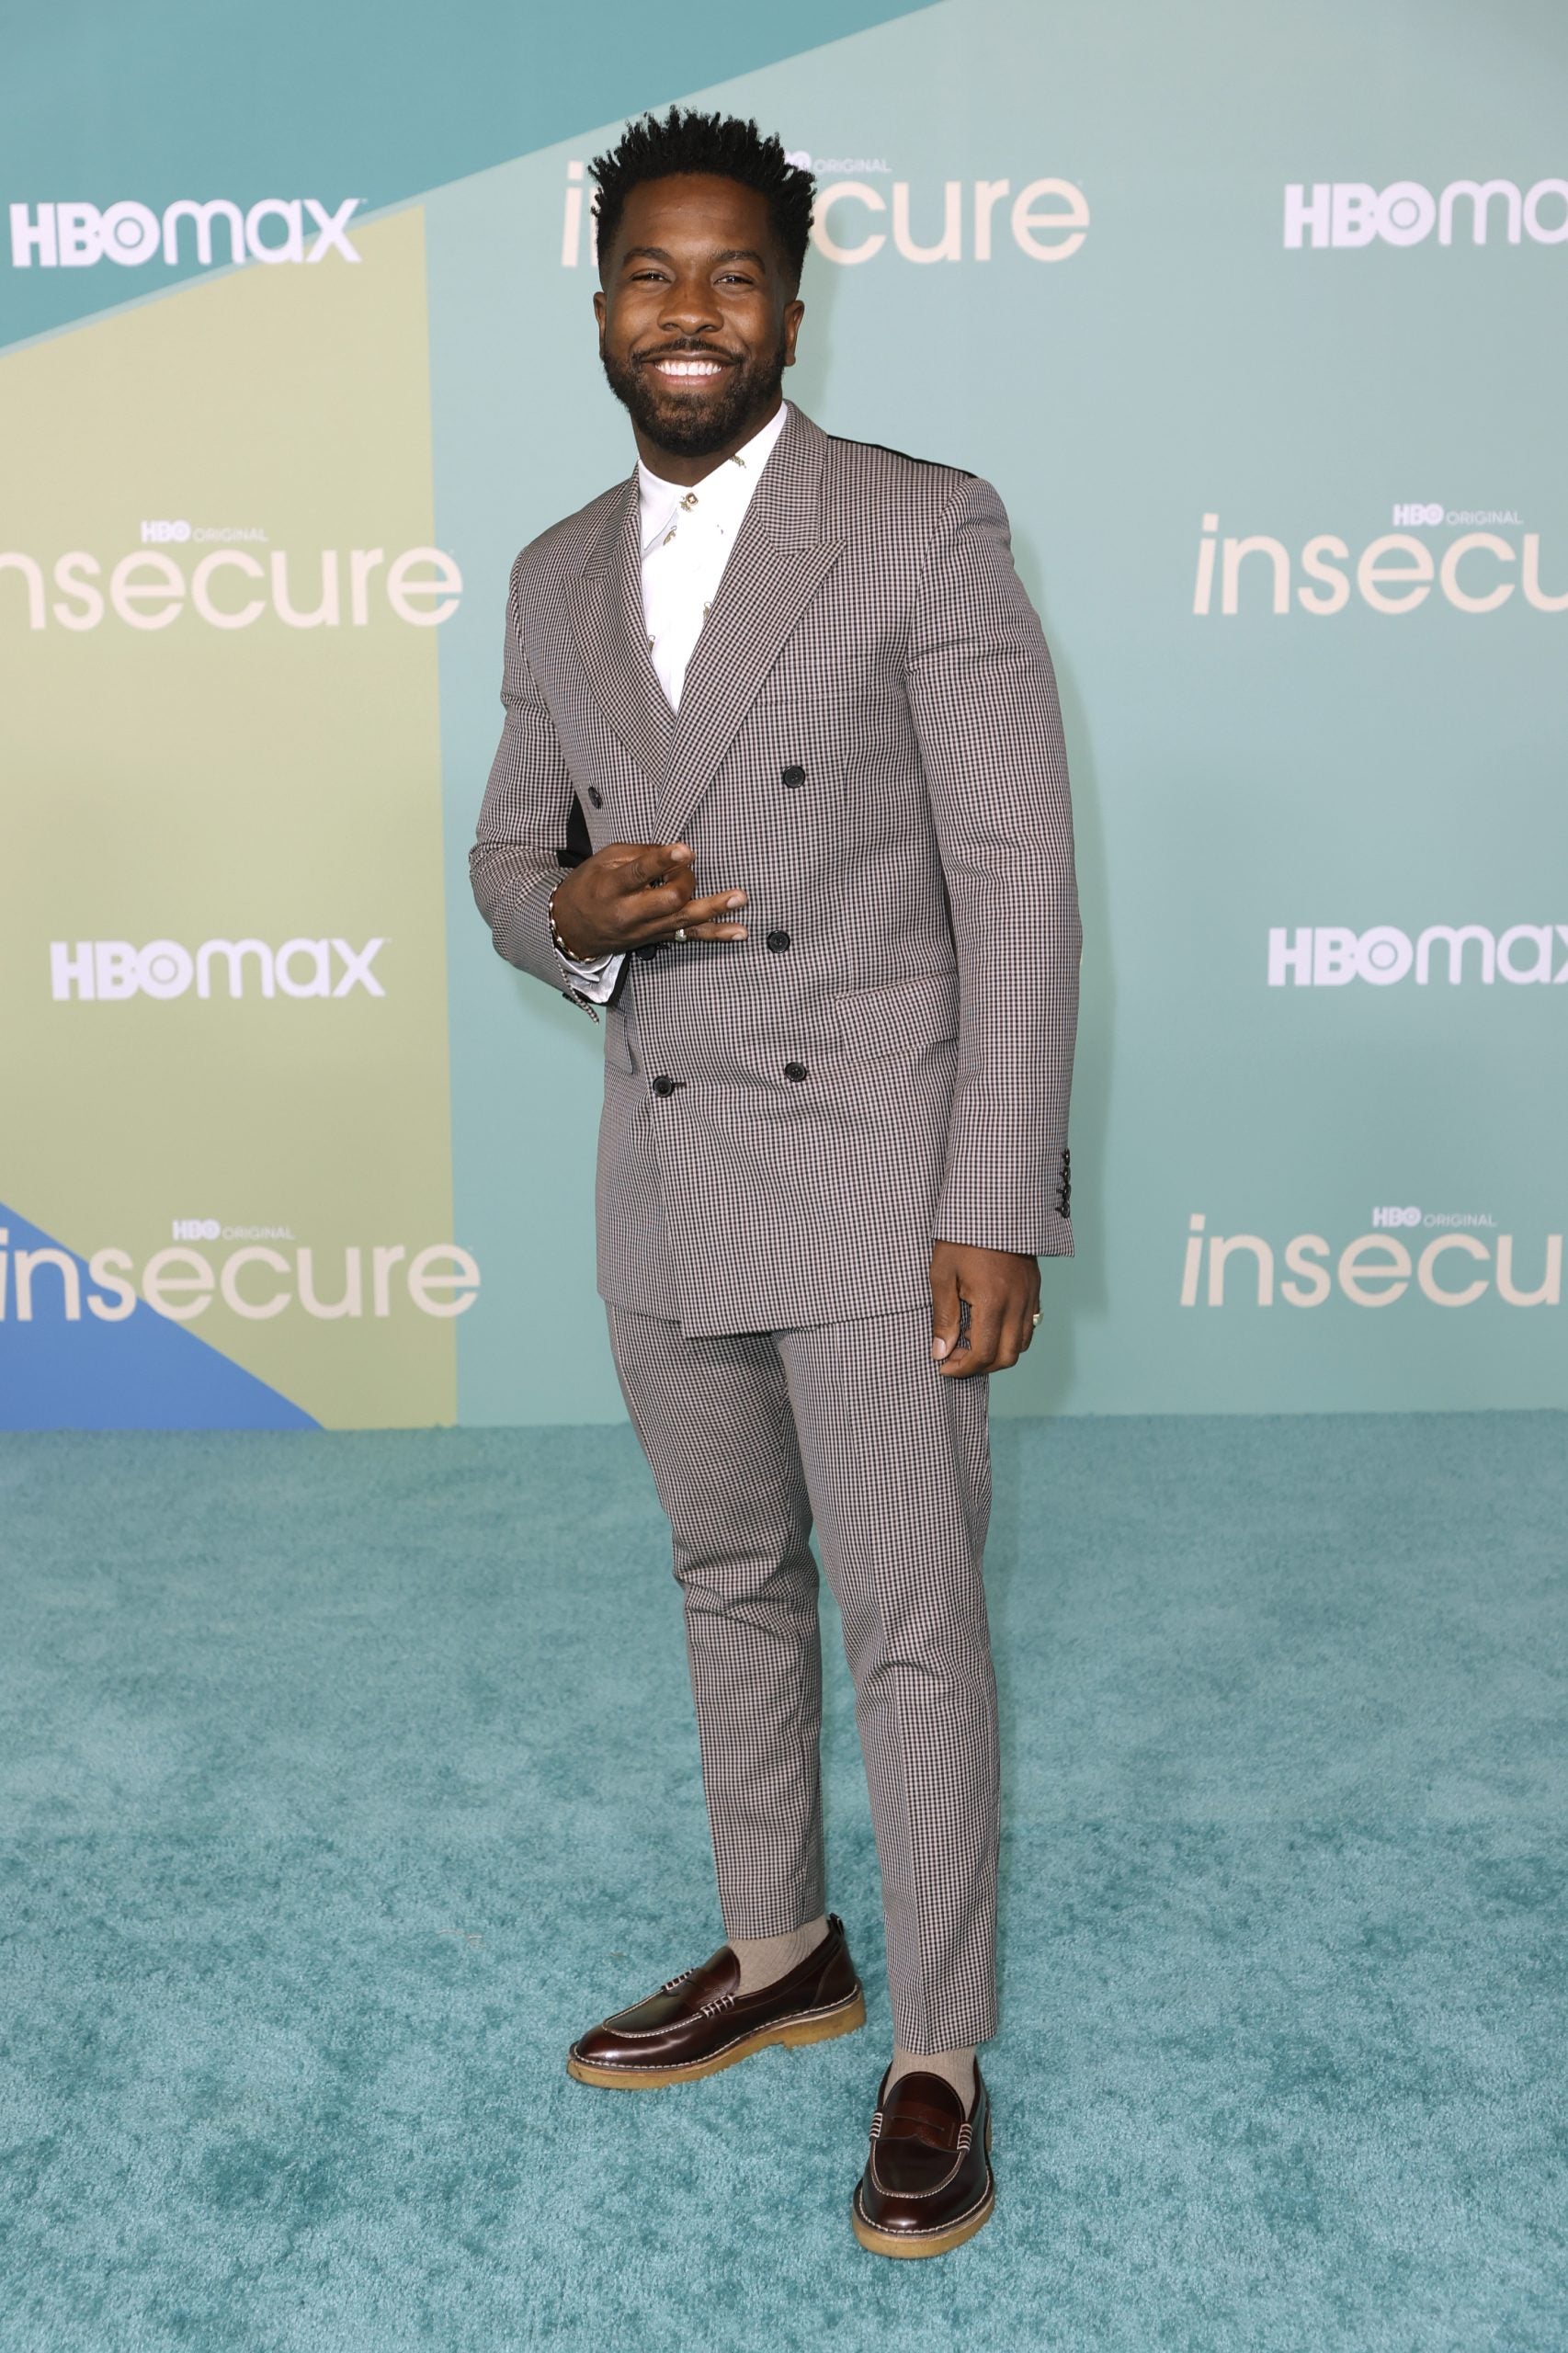 The Cast of HBO's 'Insecure' Looked Hella Good at the Final Season Premiere Event